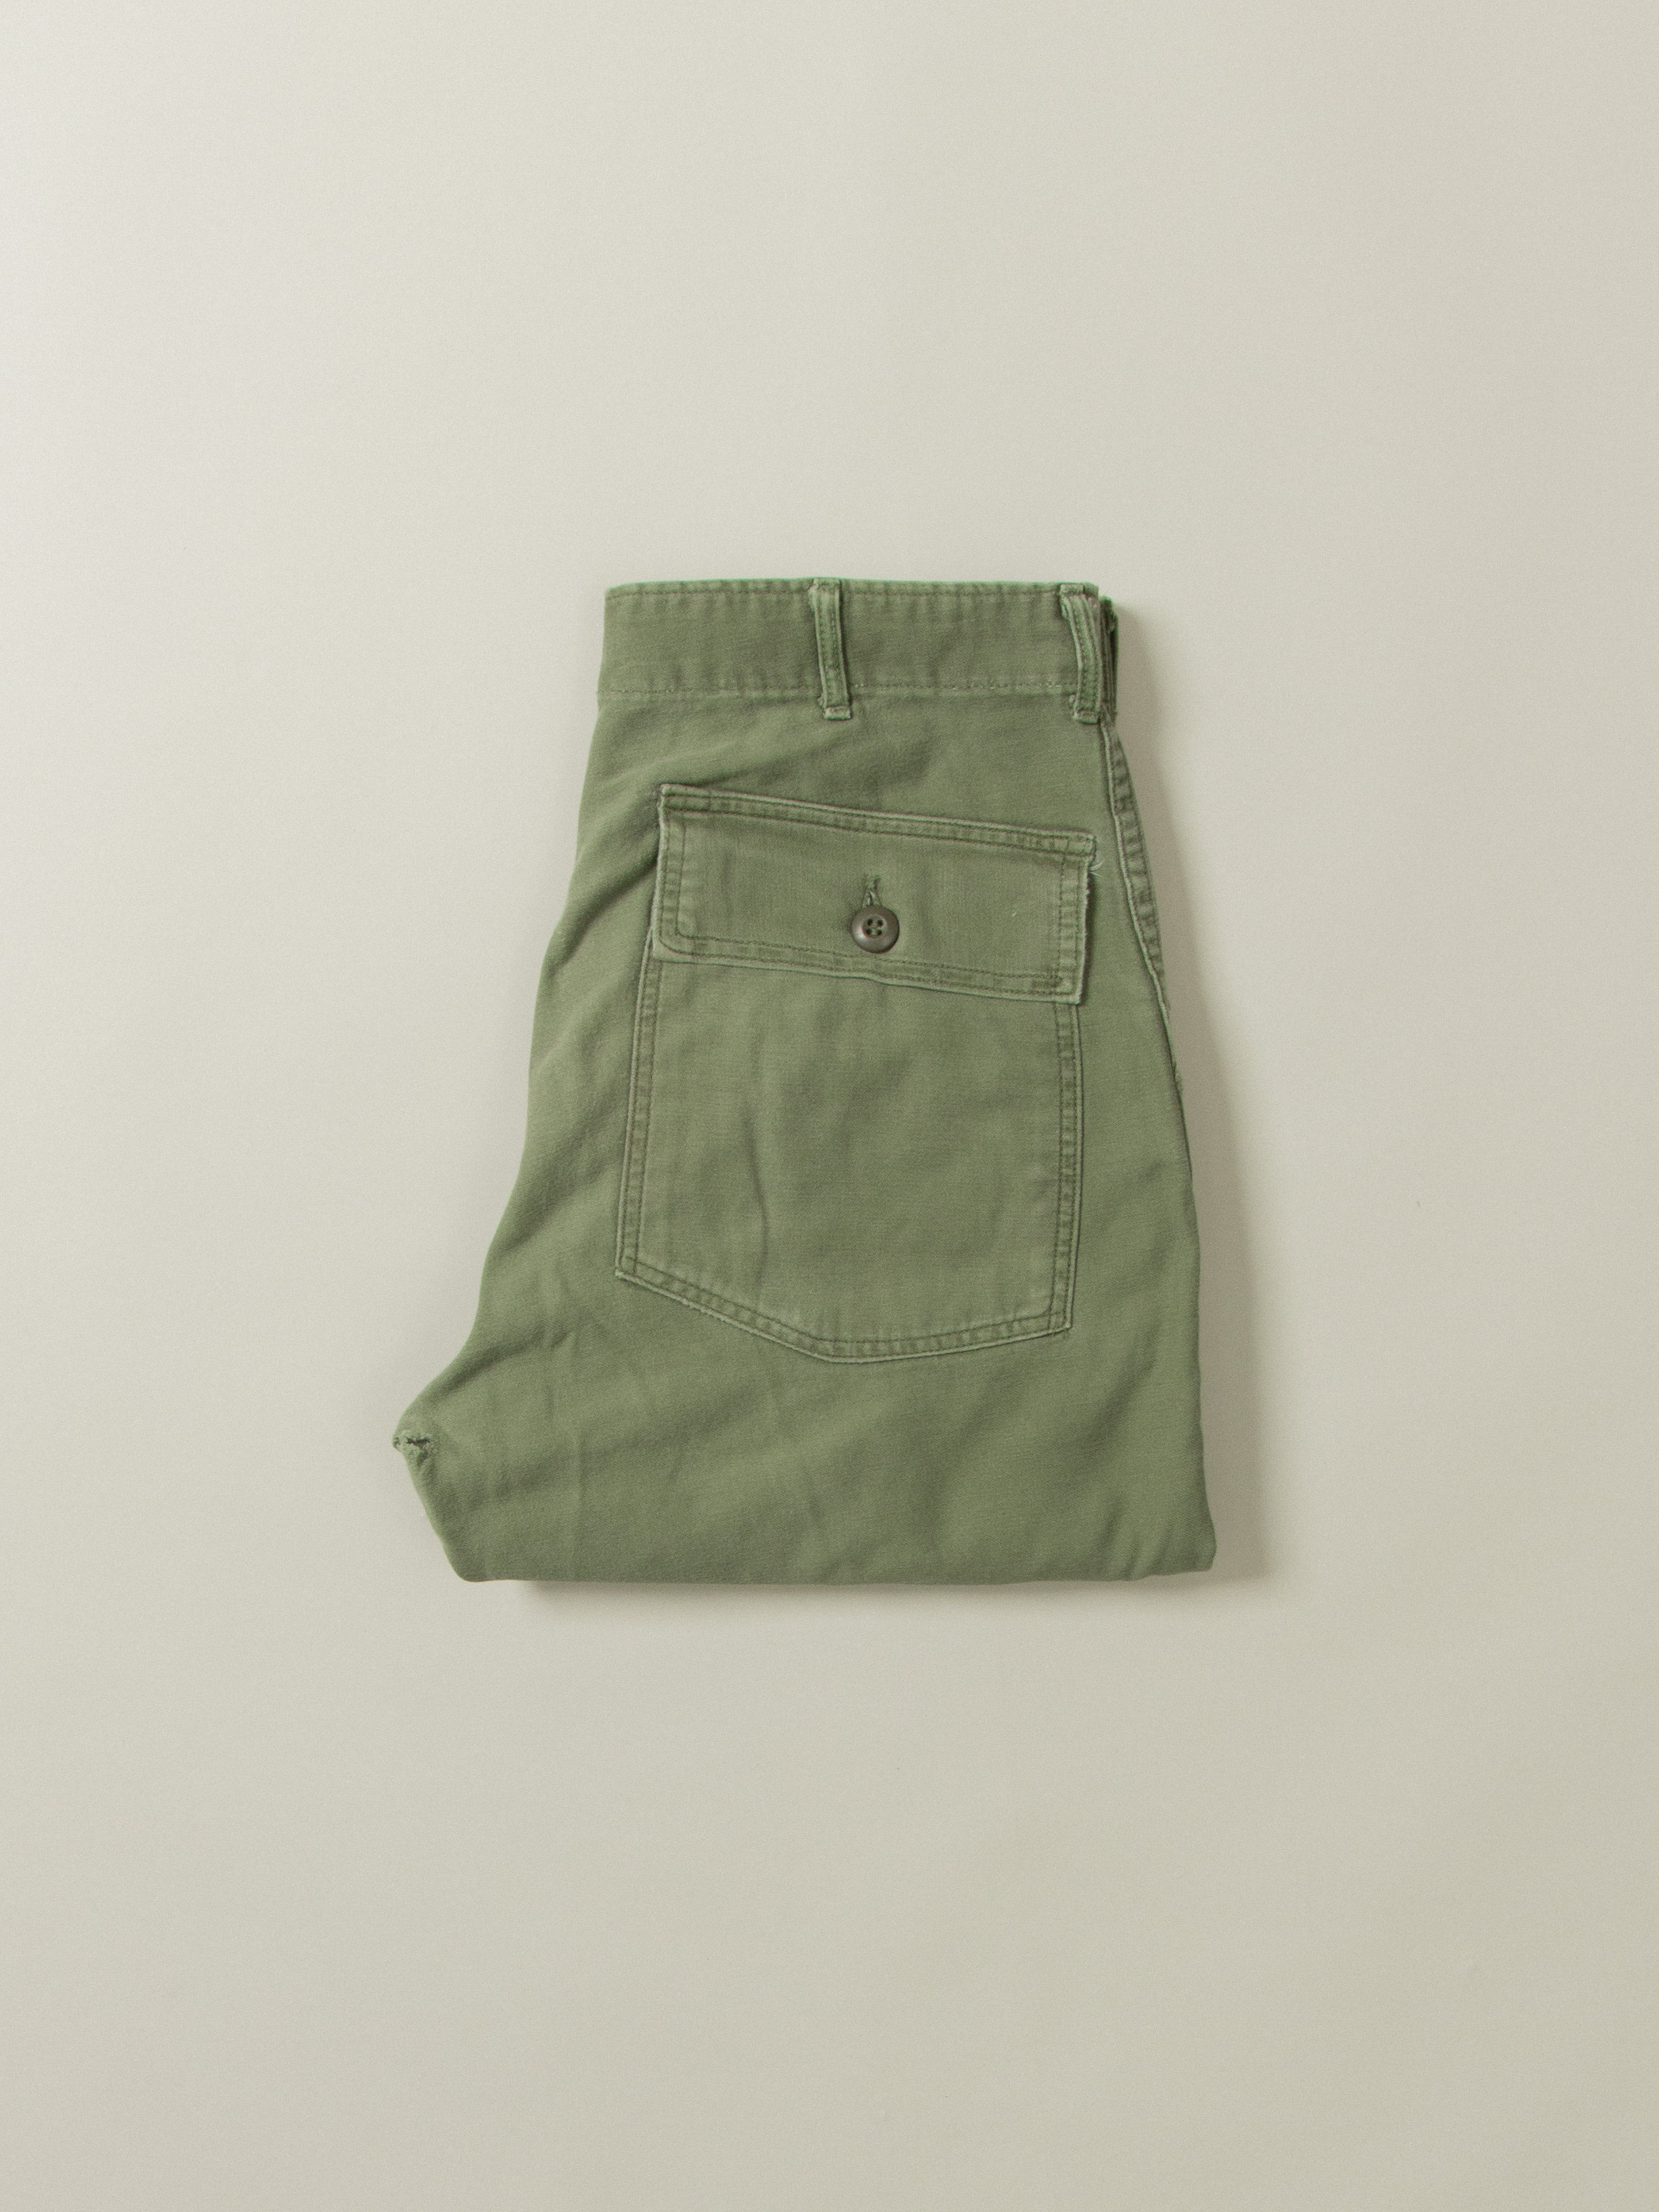 Vtg 1970s US Army OG-107 Fatigue Trousers (32x30)